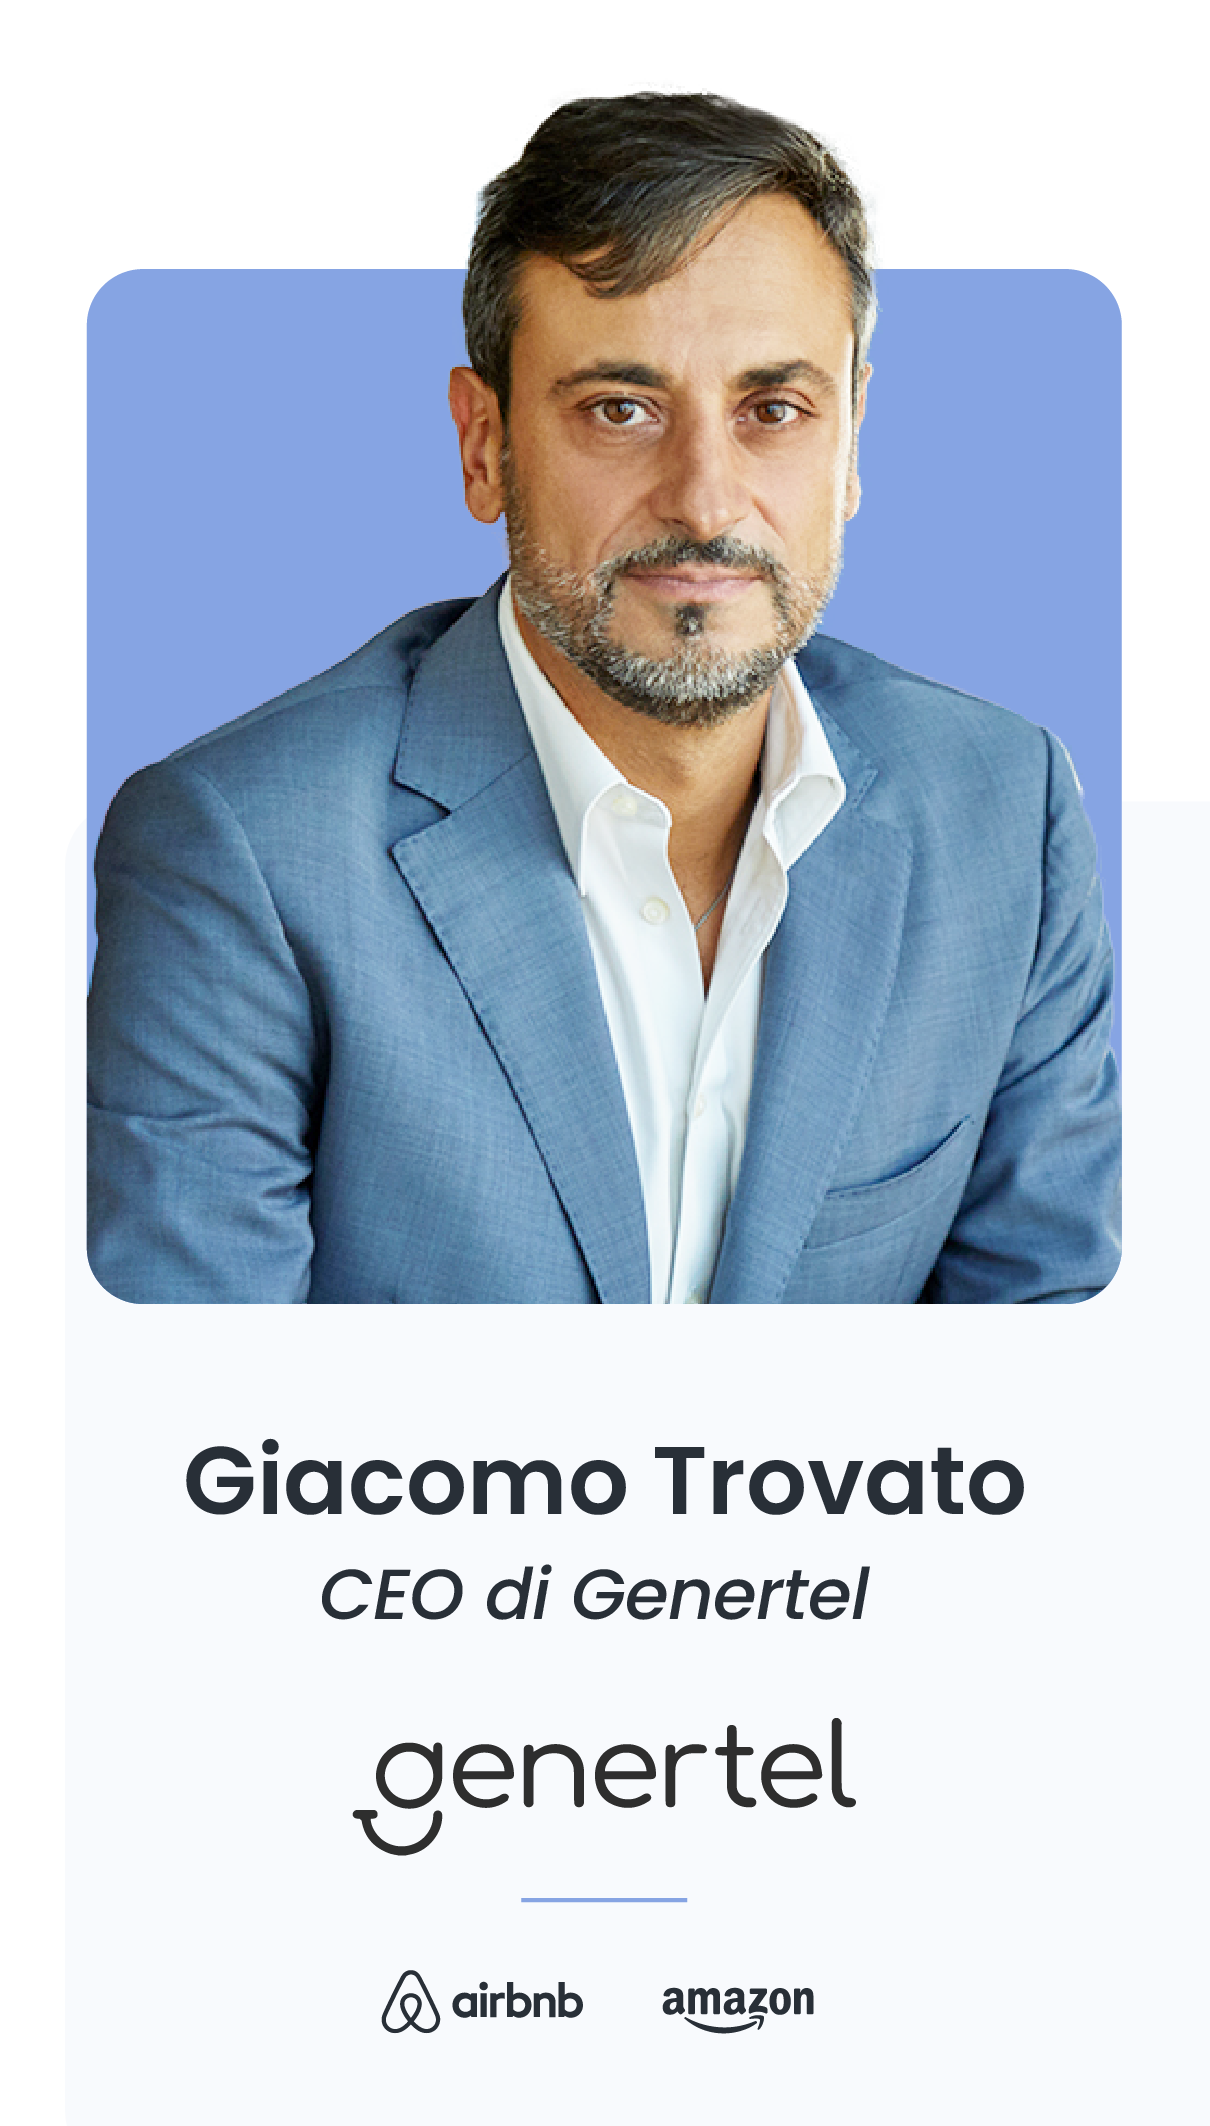 Card Giacomo Trovato Country Manager Airbnb Amazon